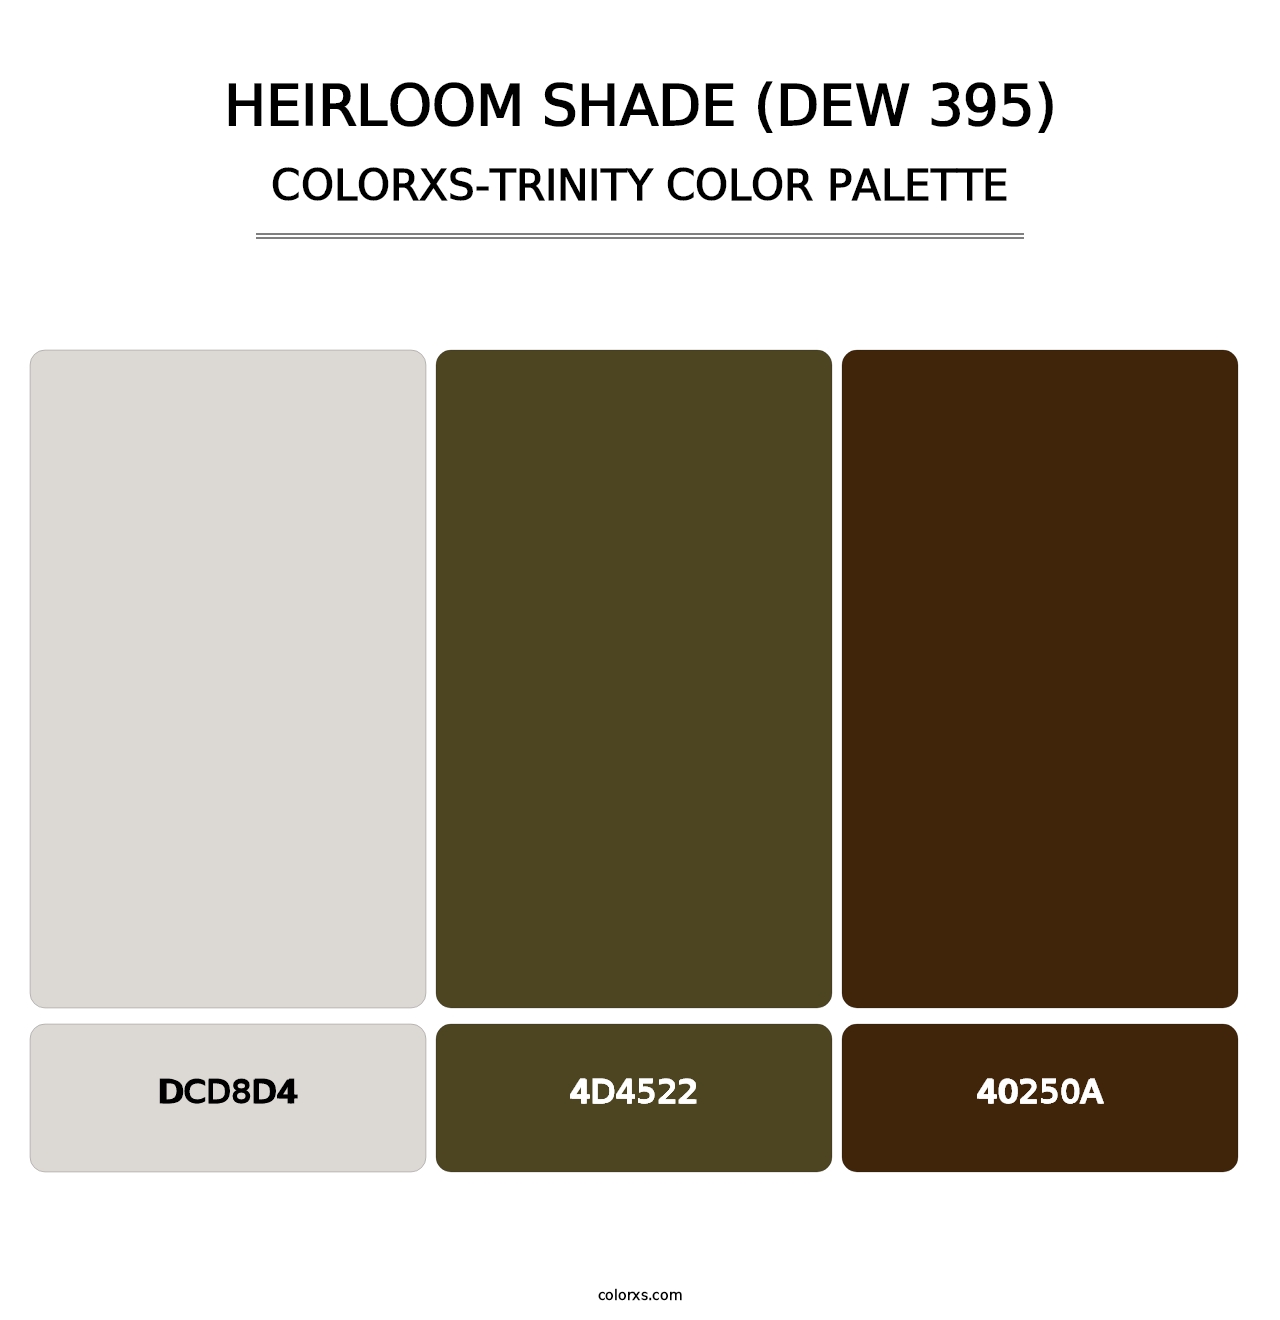 Heirloom Shade (DEW 395) - Colorxs Trinity Palette